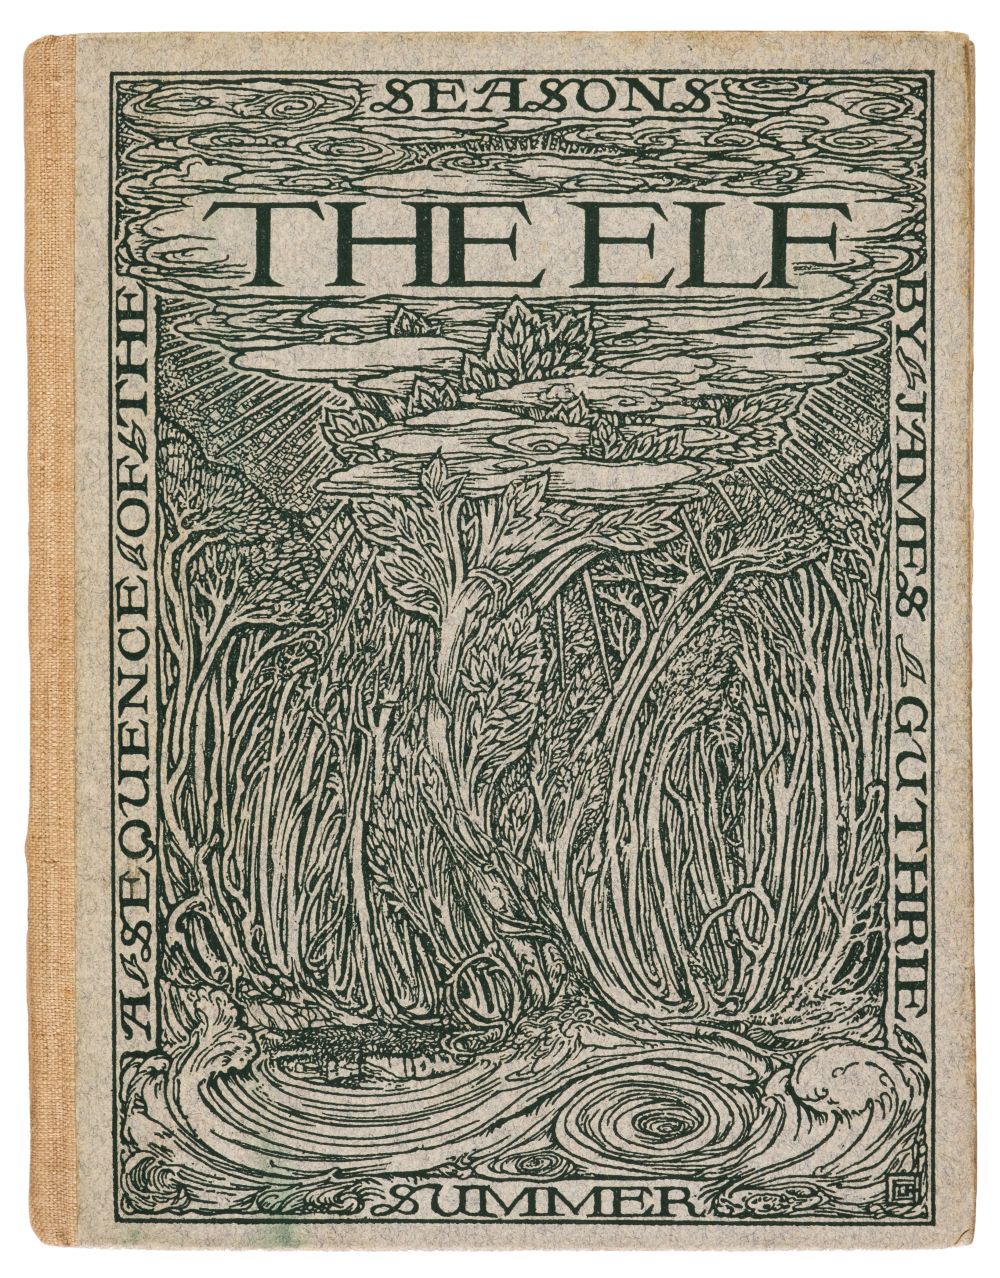 Old Bourne Press. The Elf, 4 volumes 1902-04 - Image 3 of 5